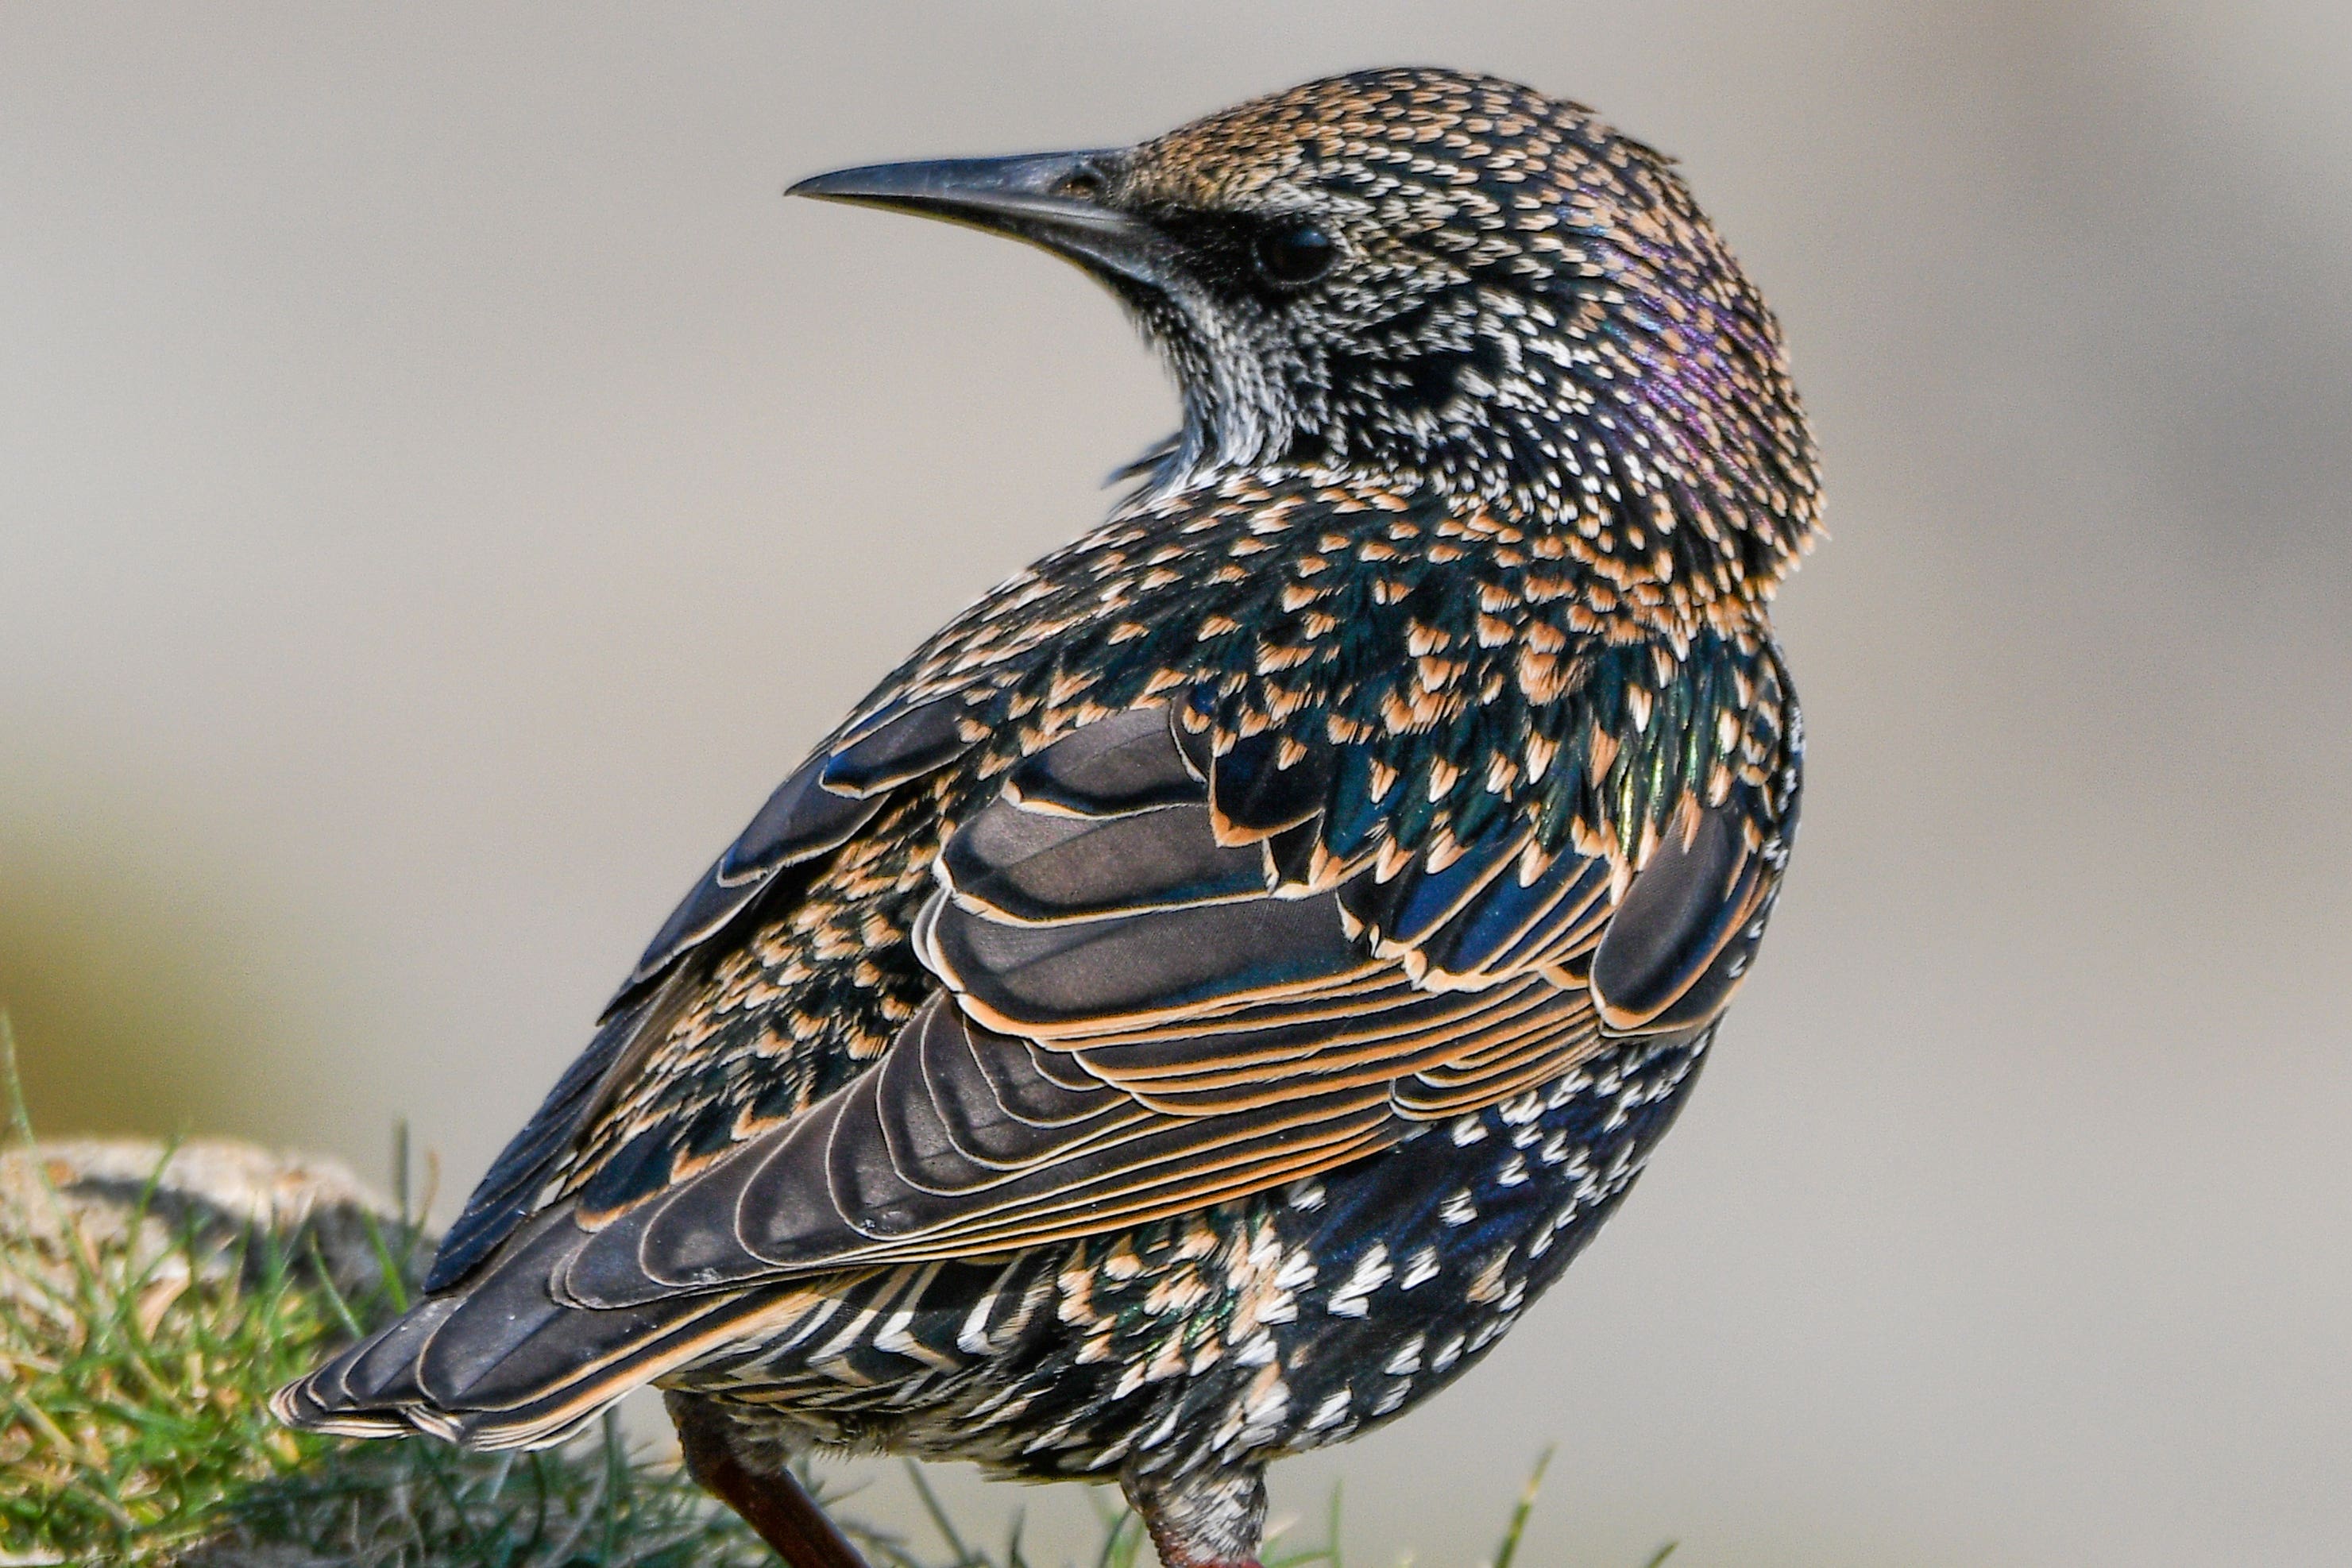 A European starling foraging on a grassy headland (Verity Hill/RSPB/PA)